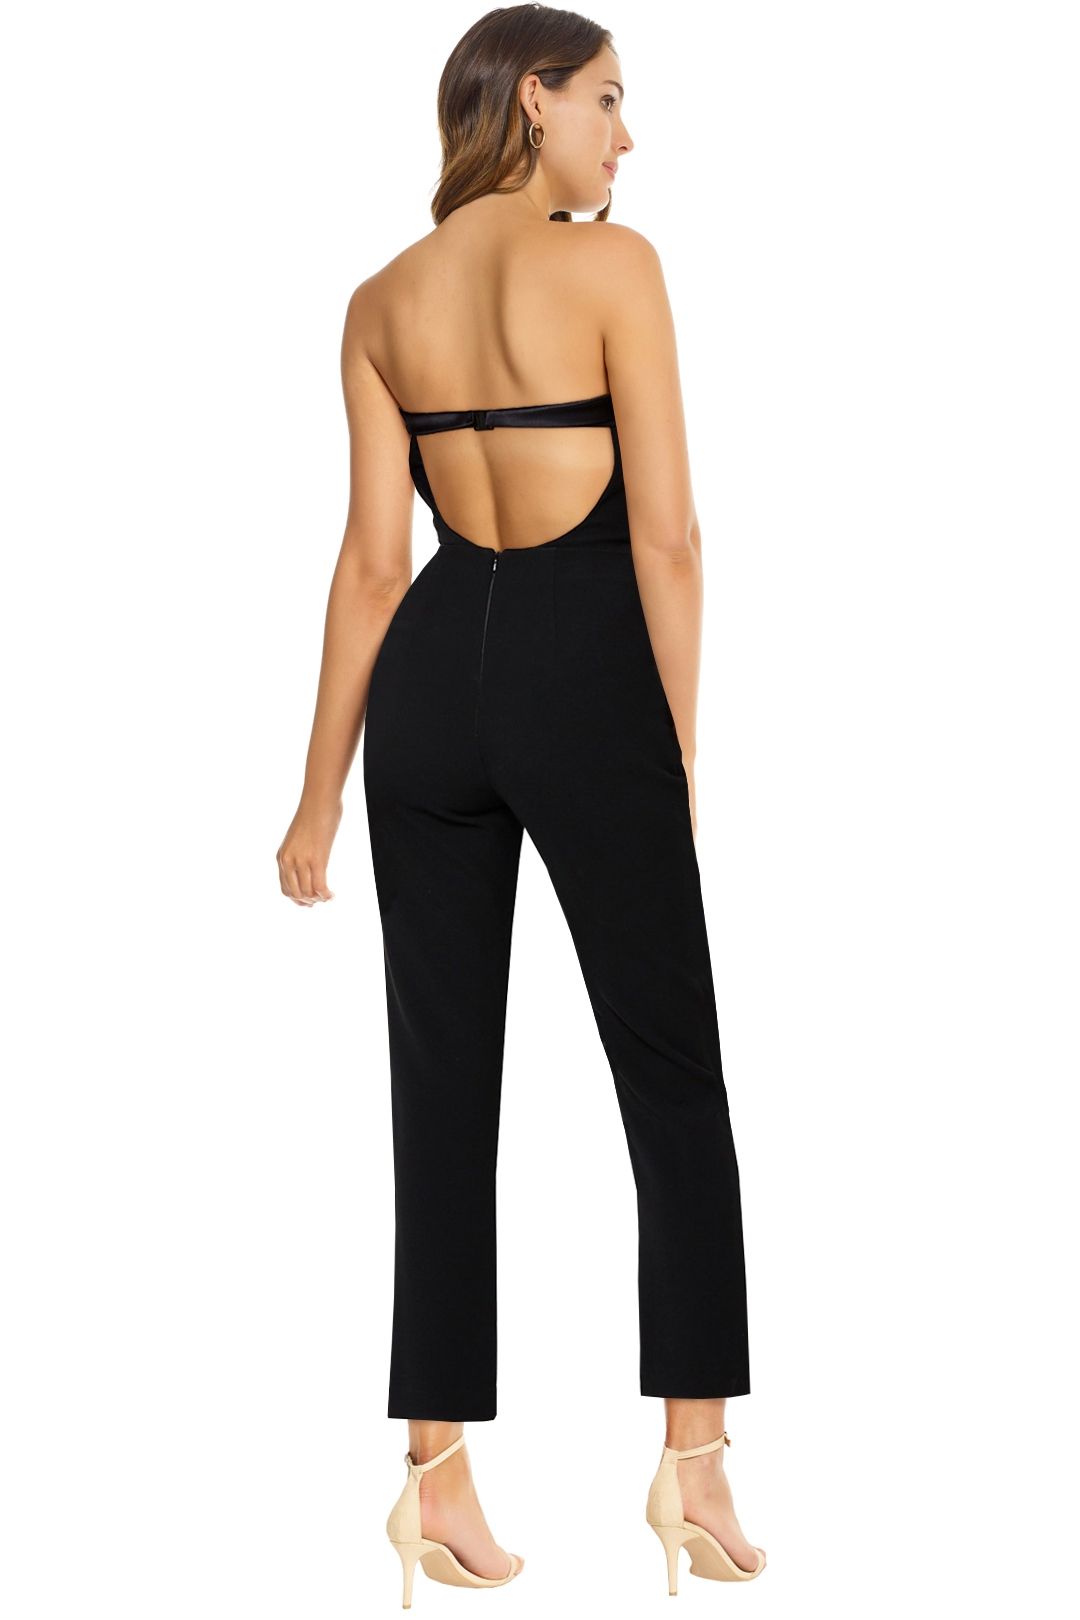 Like A Boss Jumpsuit by Bec & Bridge for Hire | GlamCorner